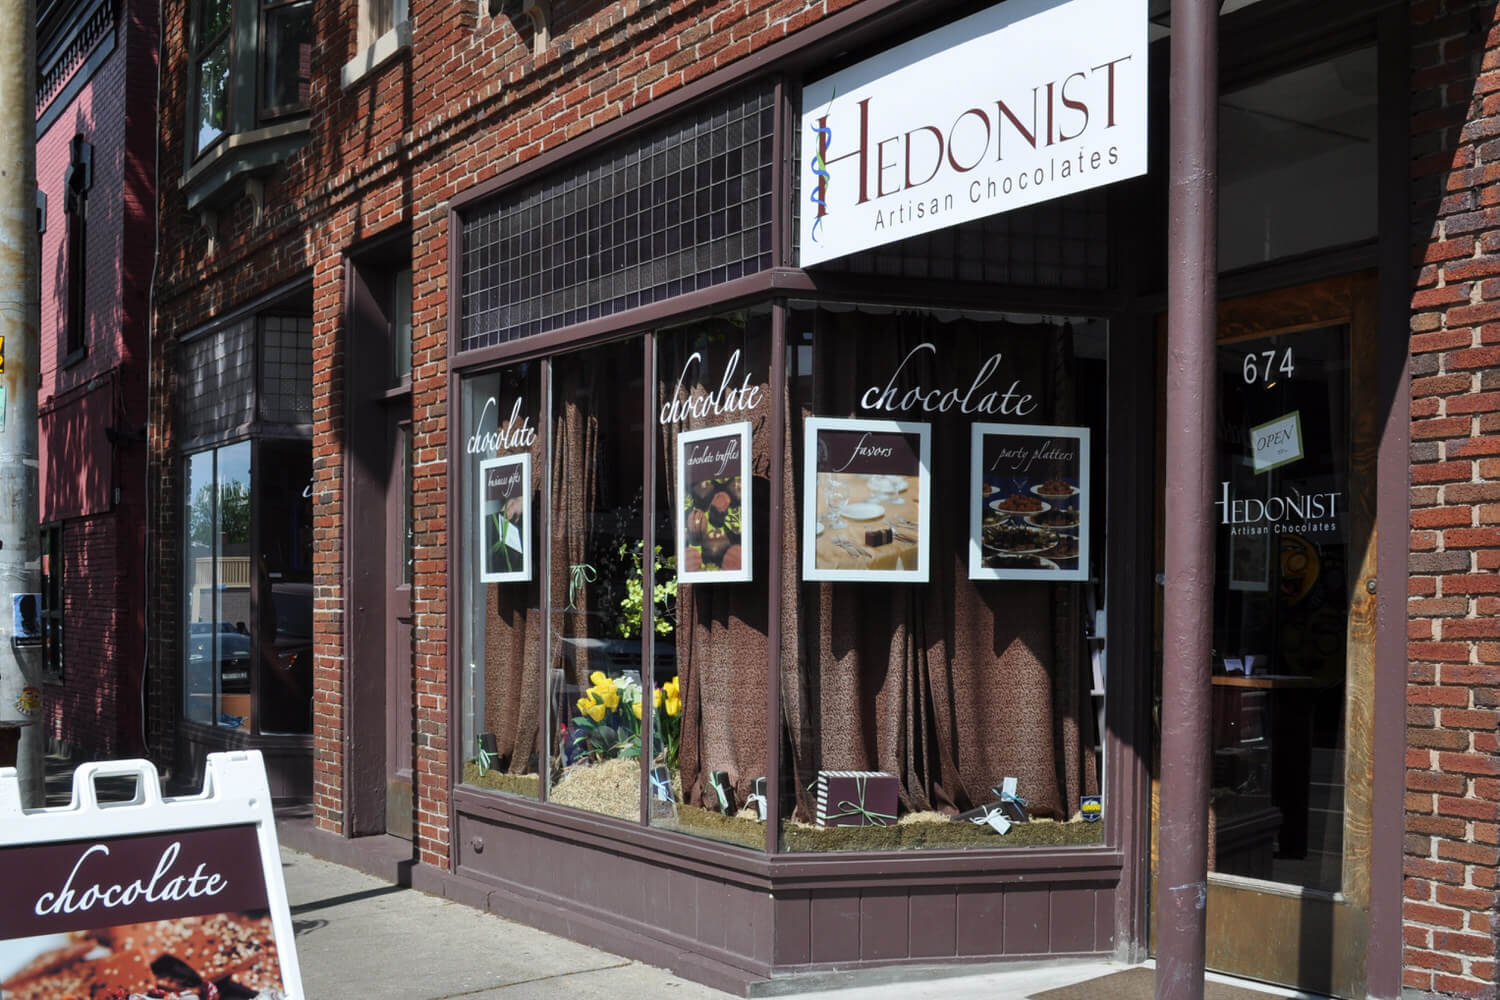 Hedonist Artisan Chocolates on South Avenue. (They have an ice cream shop next door, too!)